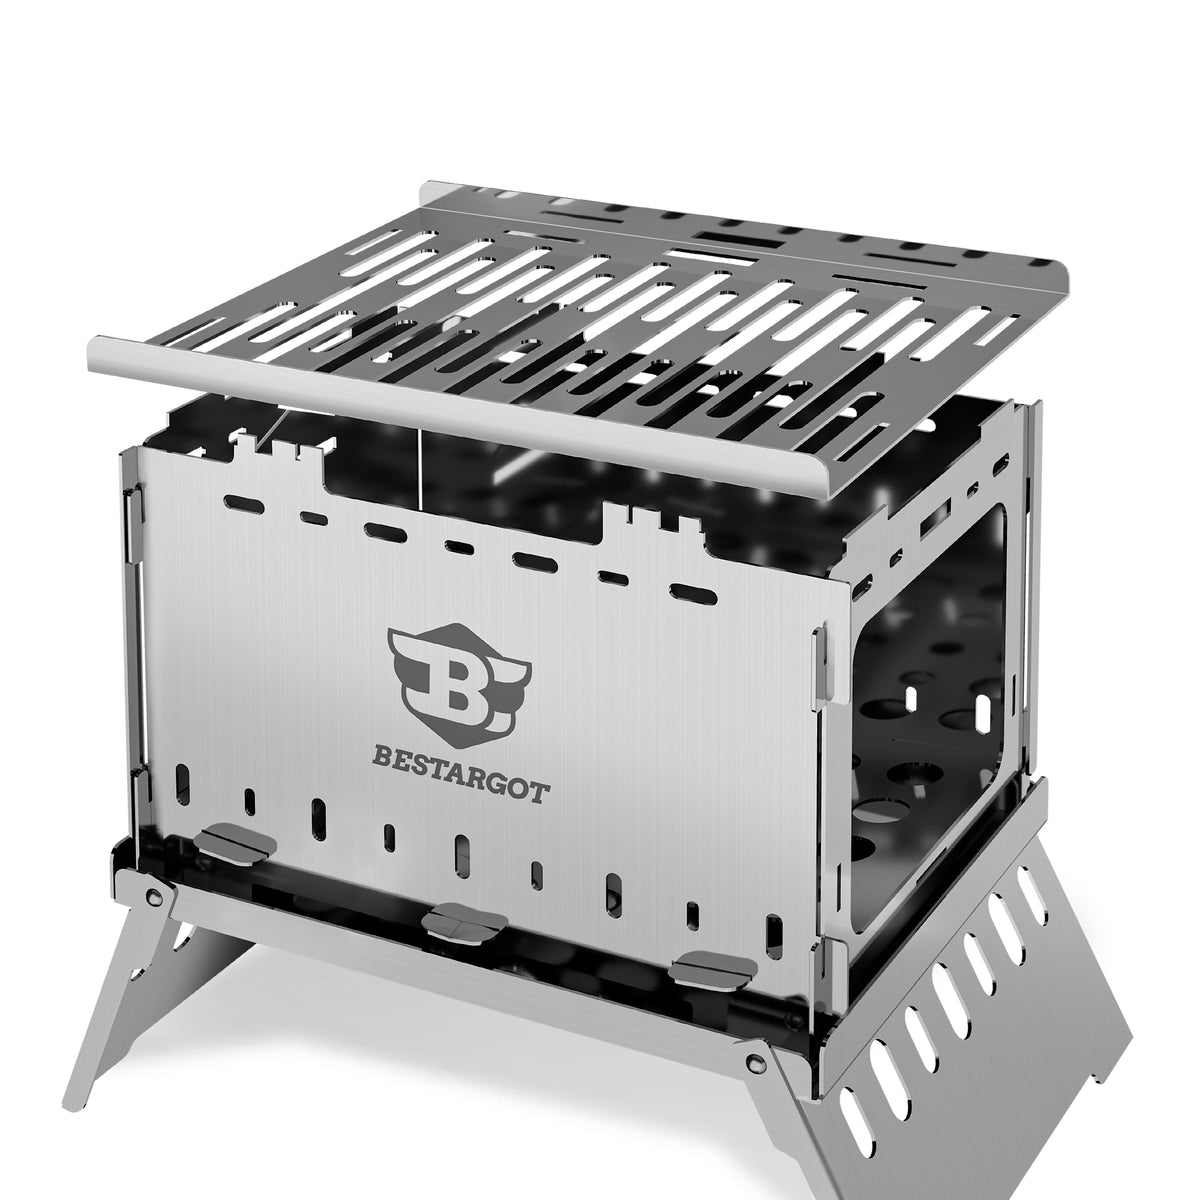 Bestargot Camping Charcoal Grill, Stainless Steel, Card Type Portable Design, for Patios, Balconies, Picnics, Camping